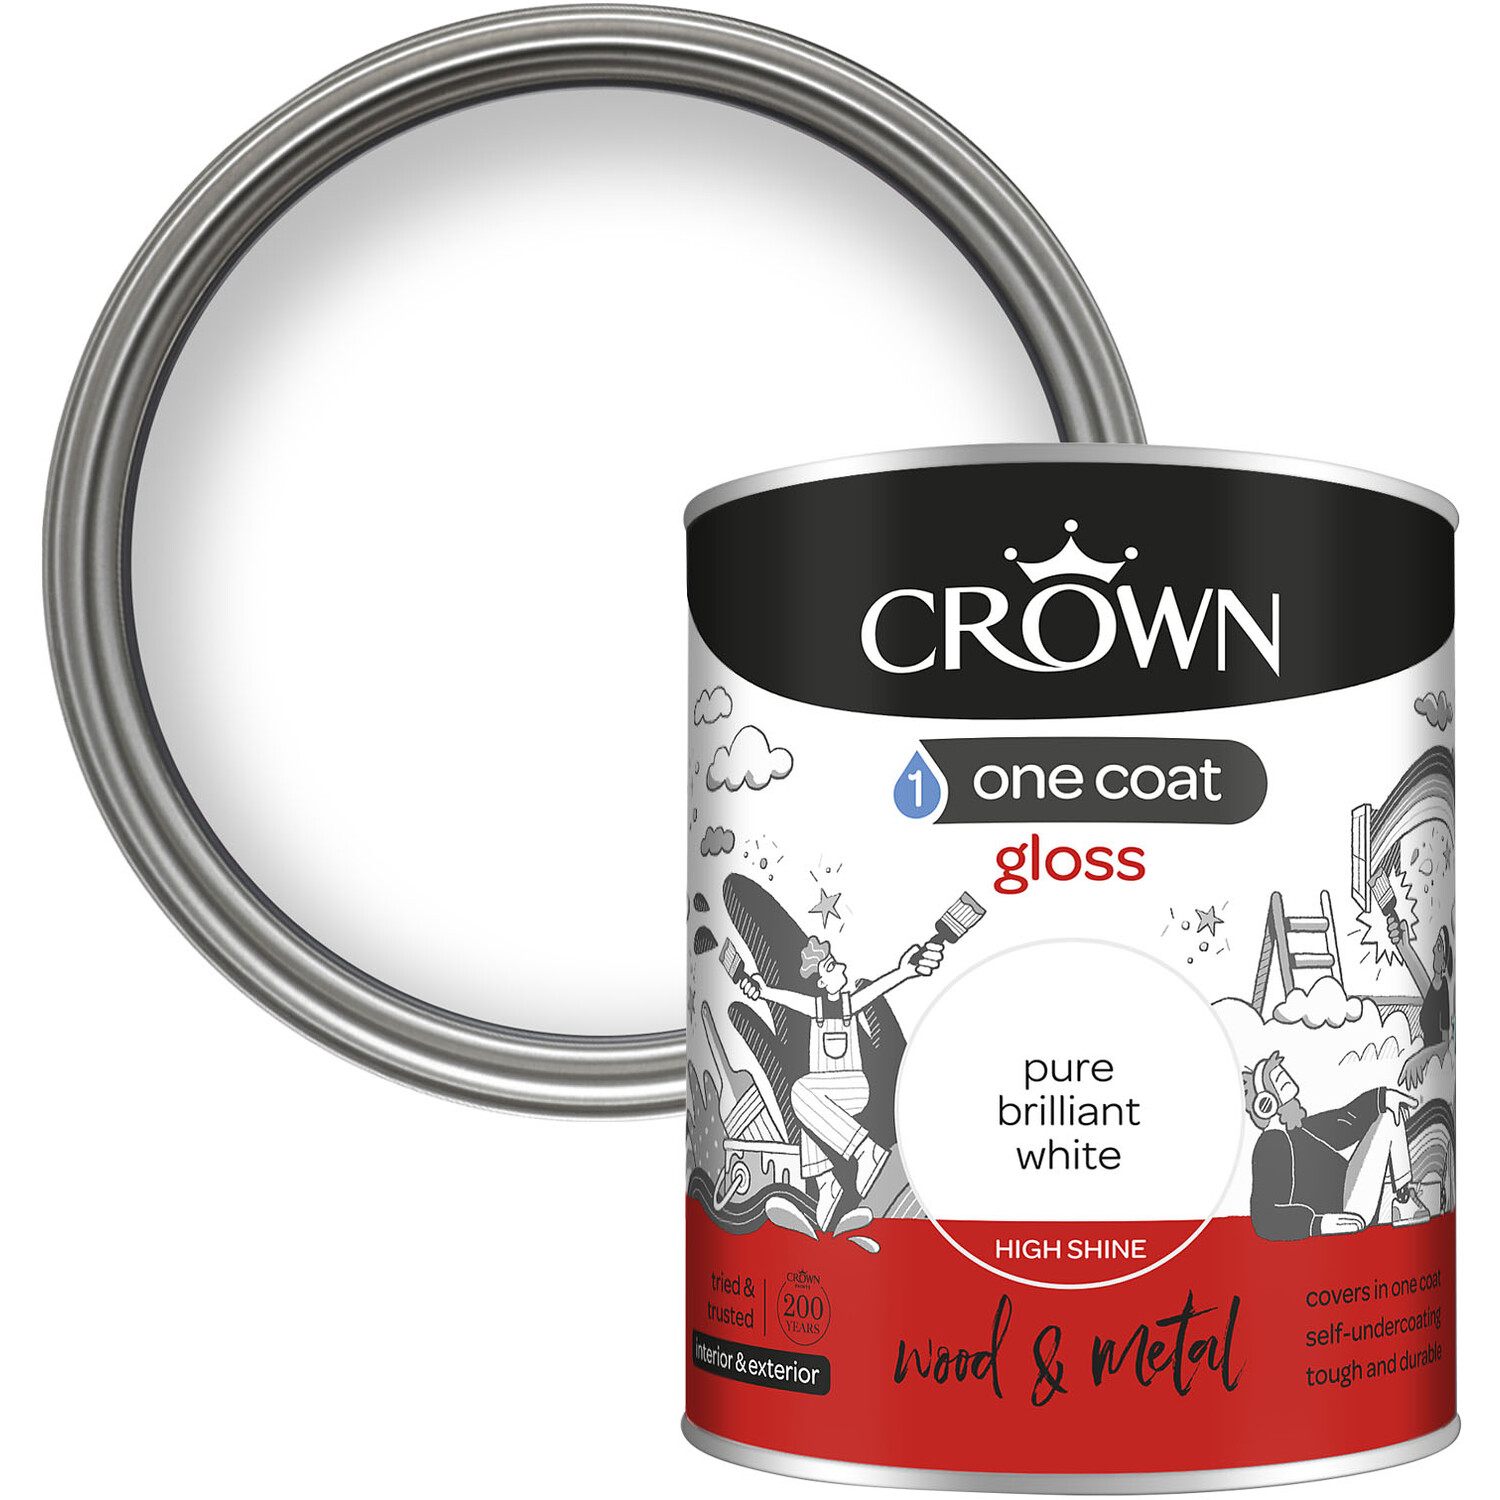 Crown One Coat Wood and Metal Pure Brilliant White Gloss Paint 750ml Image 1